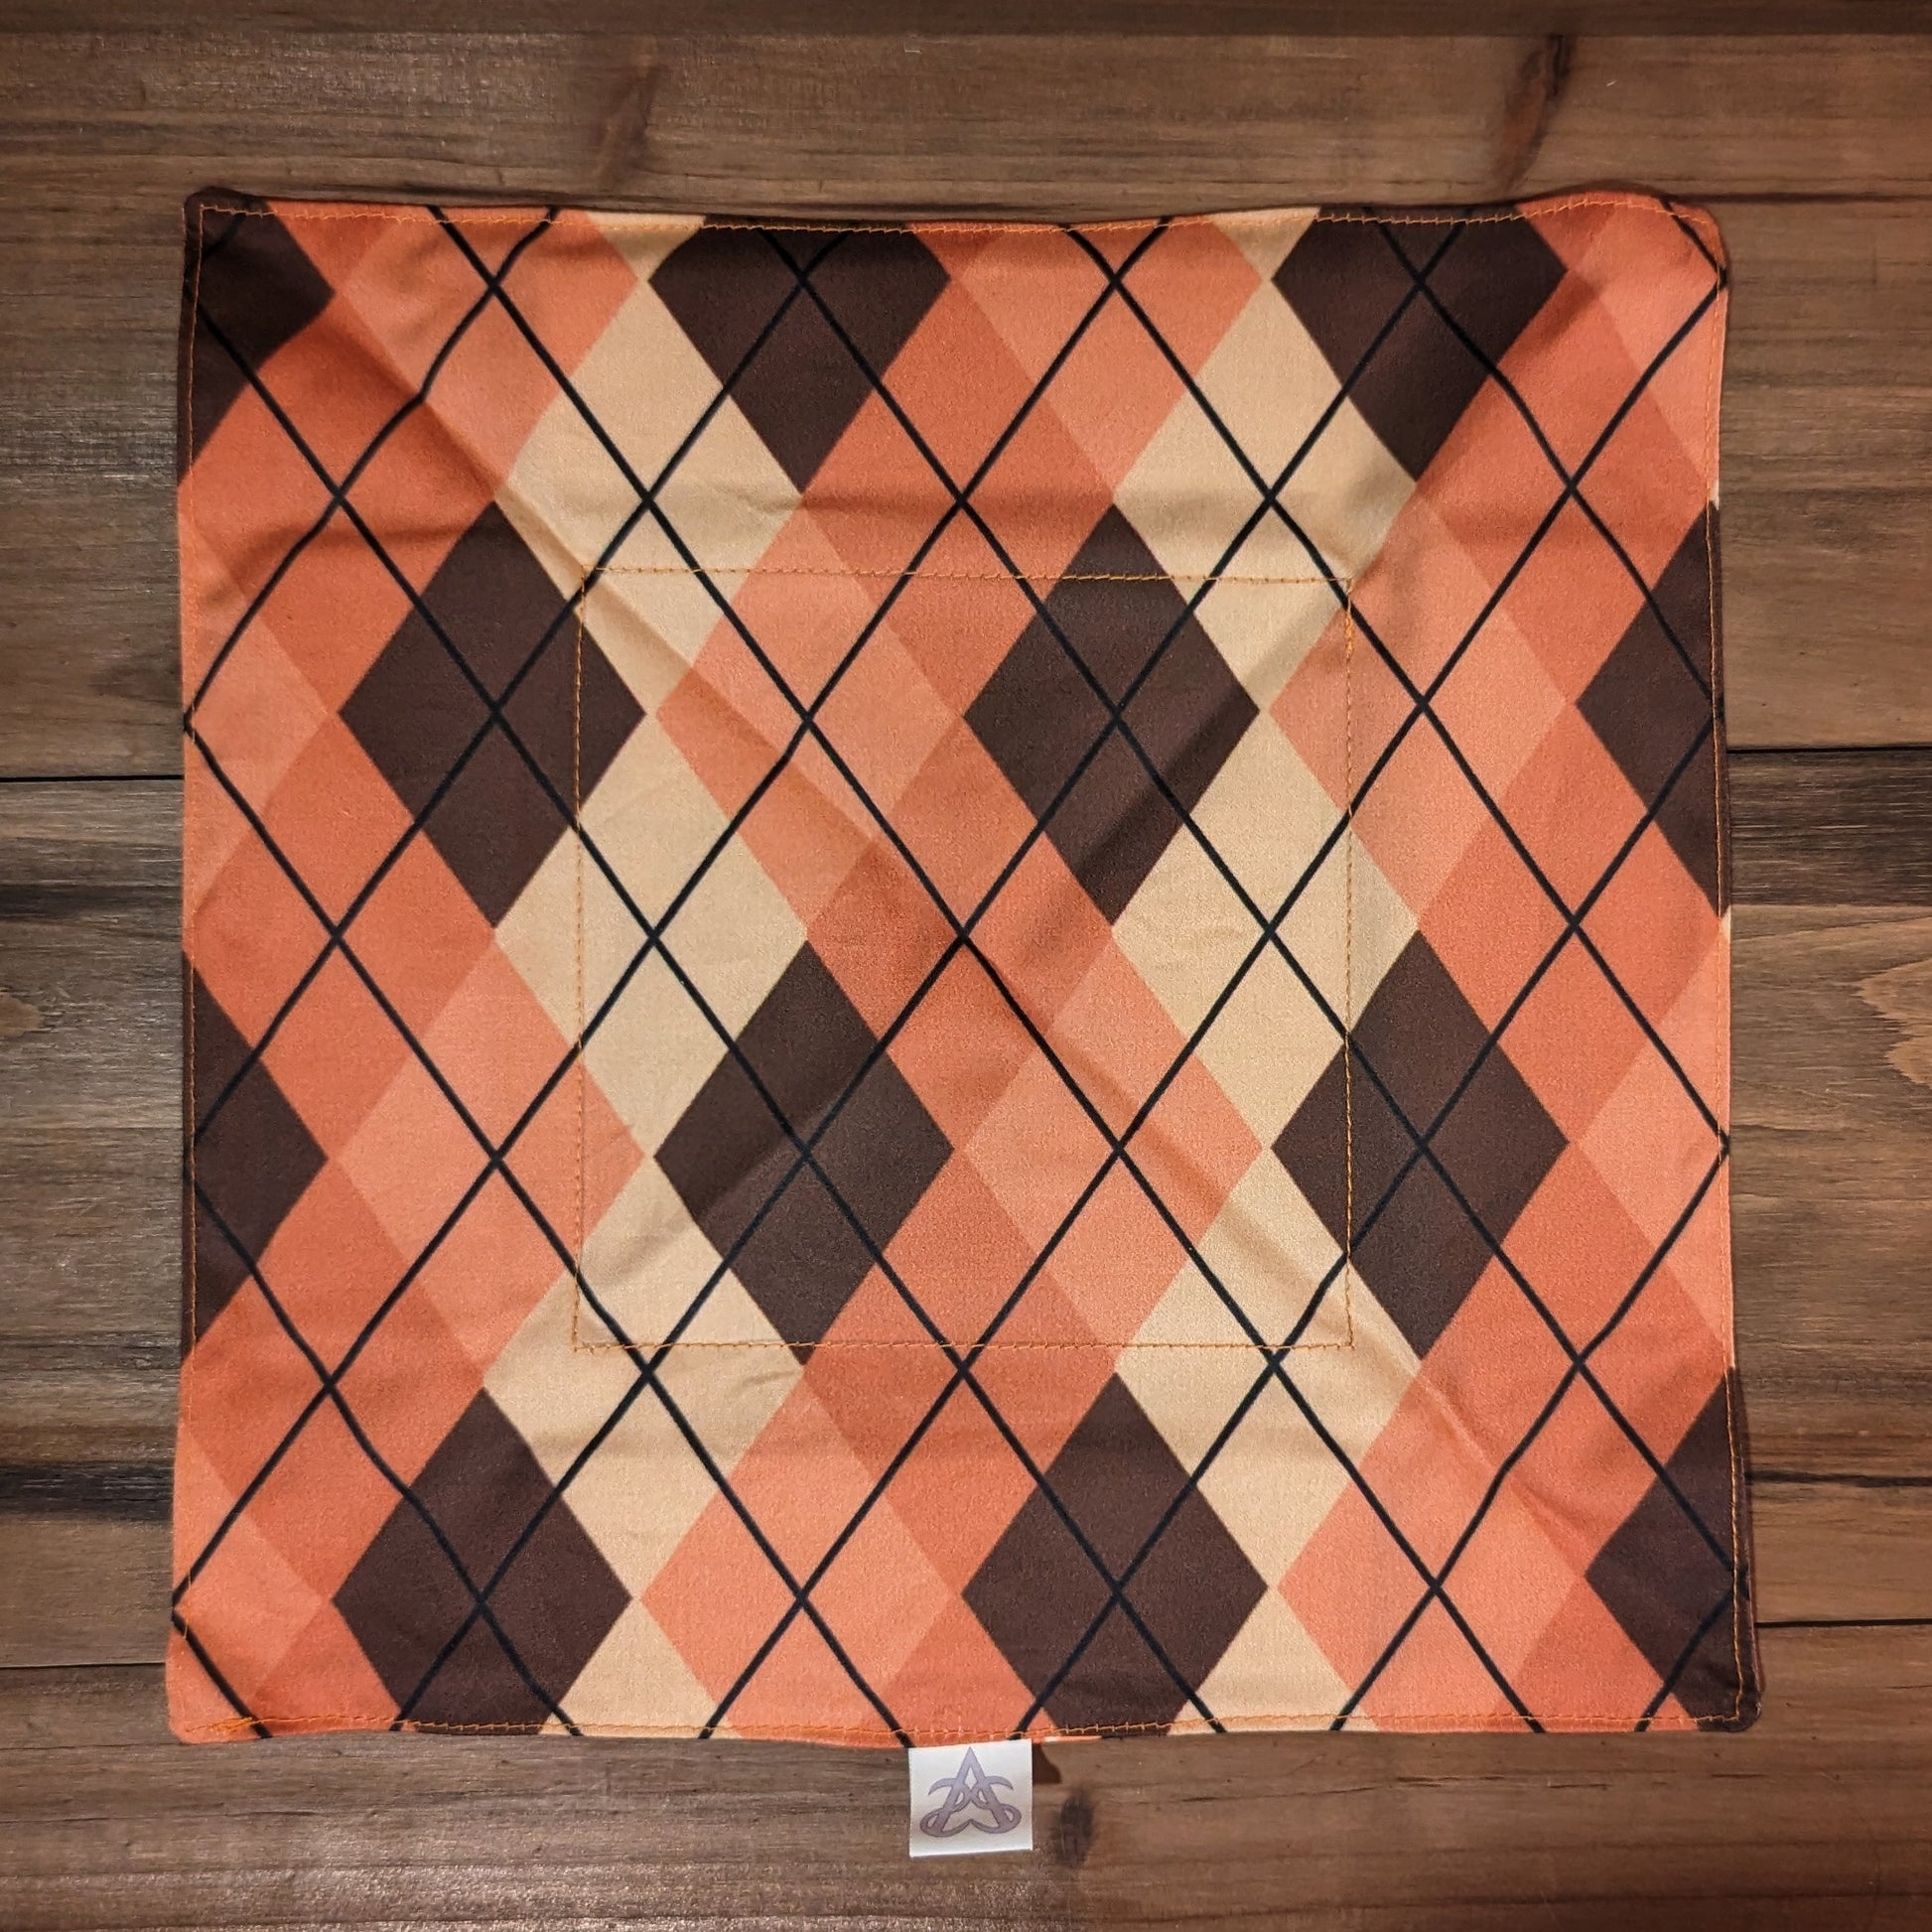 The Cozy Foxes tray laid flat to show the peach and brown argyle print side.